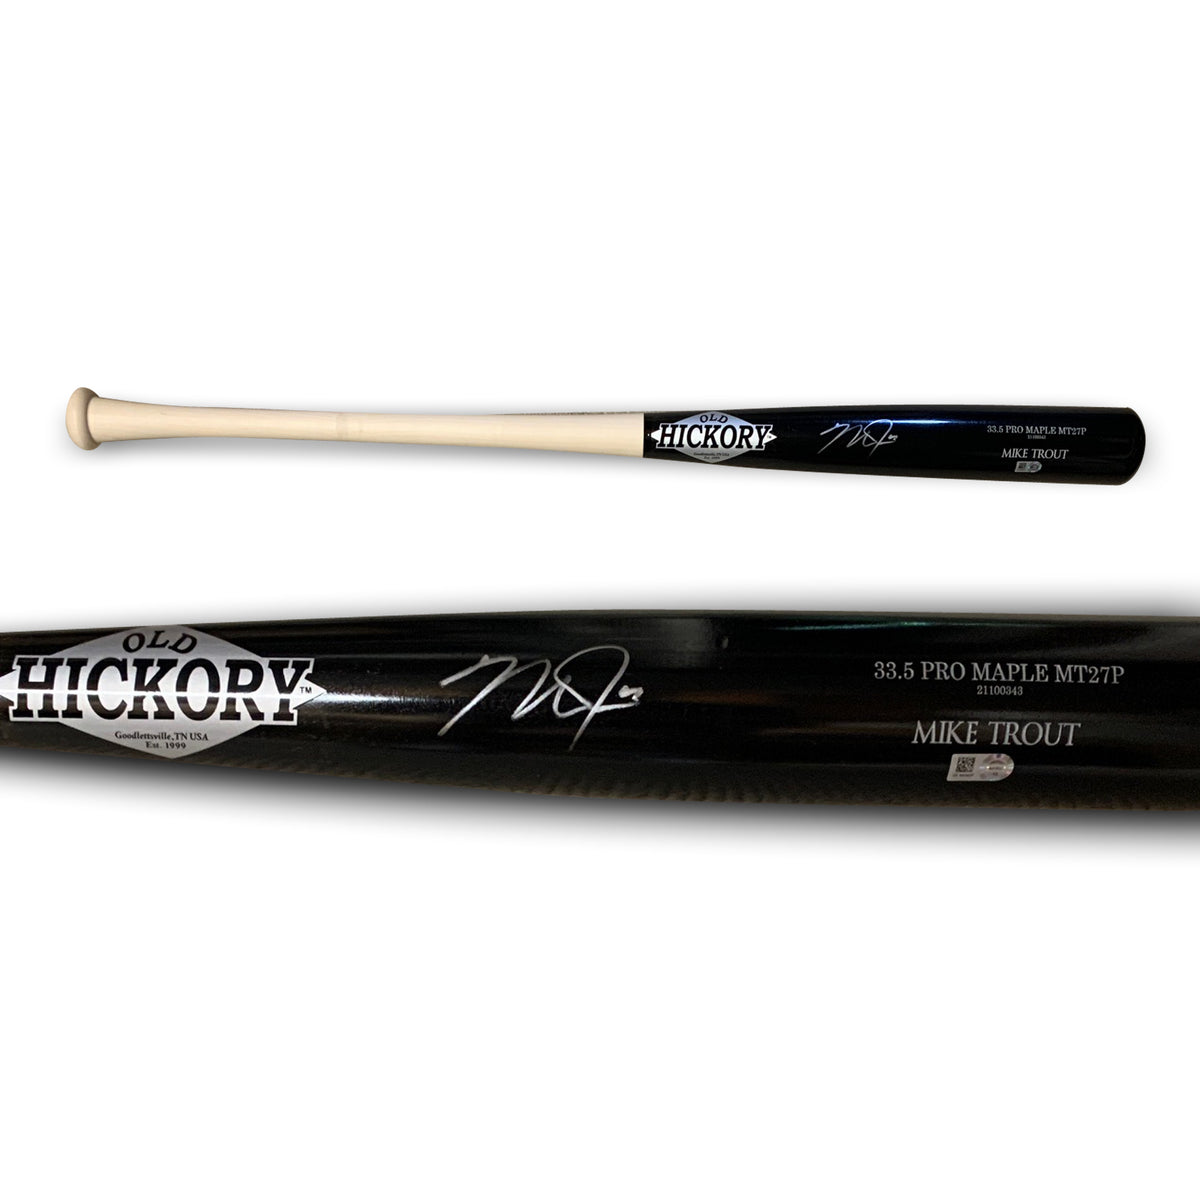 Autographed Signed Baseball Bats - Authenticated + FREE SHIPPING!